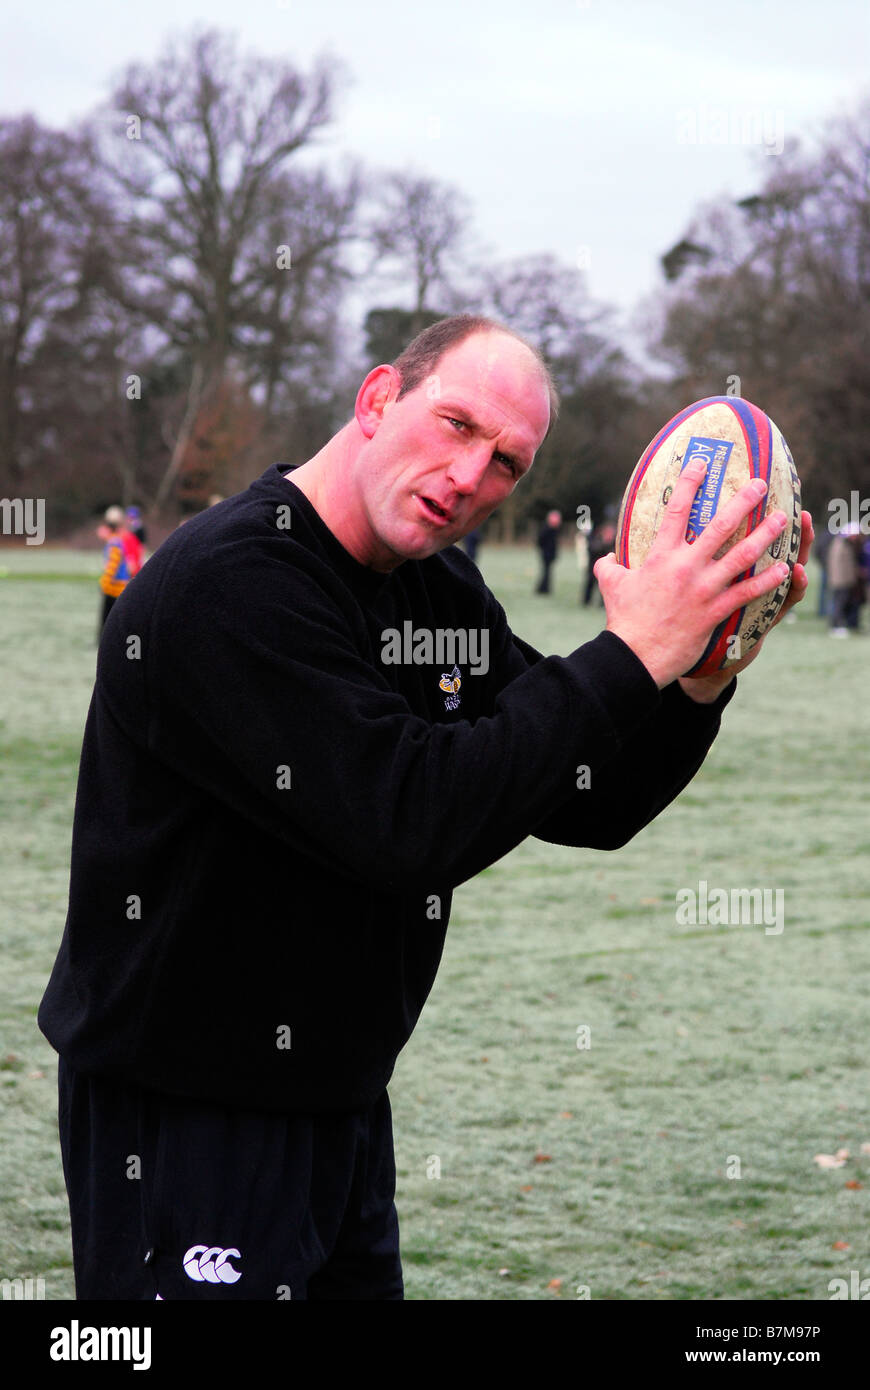 Former Wasps and England rugby star Lawrence Dallaglio at a training session in Buckinghamshire UK Stock Photo